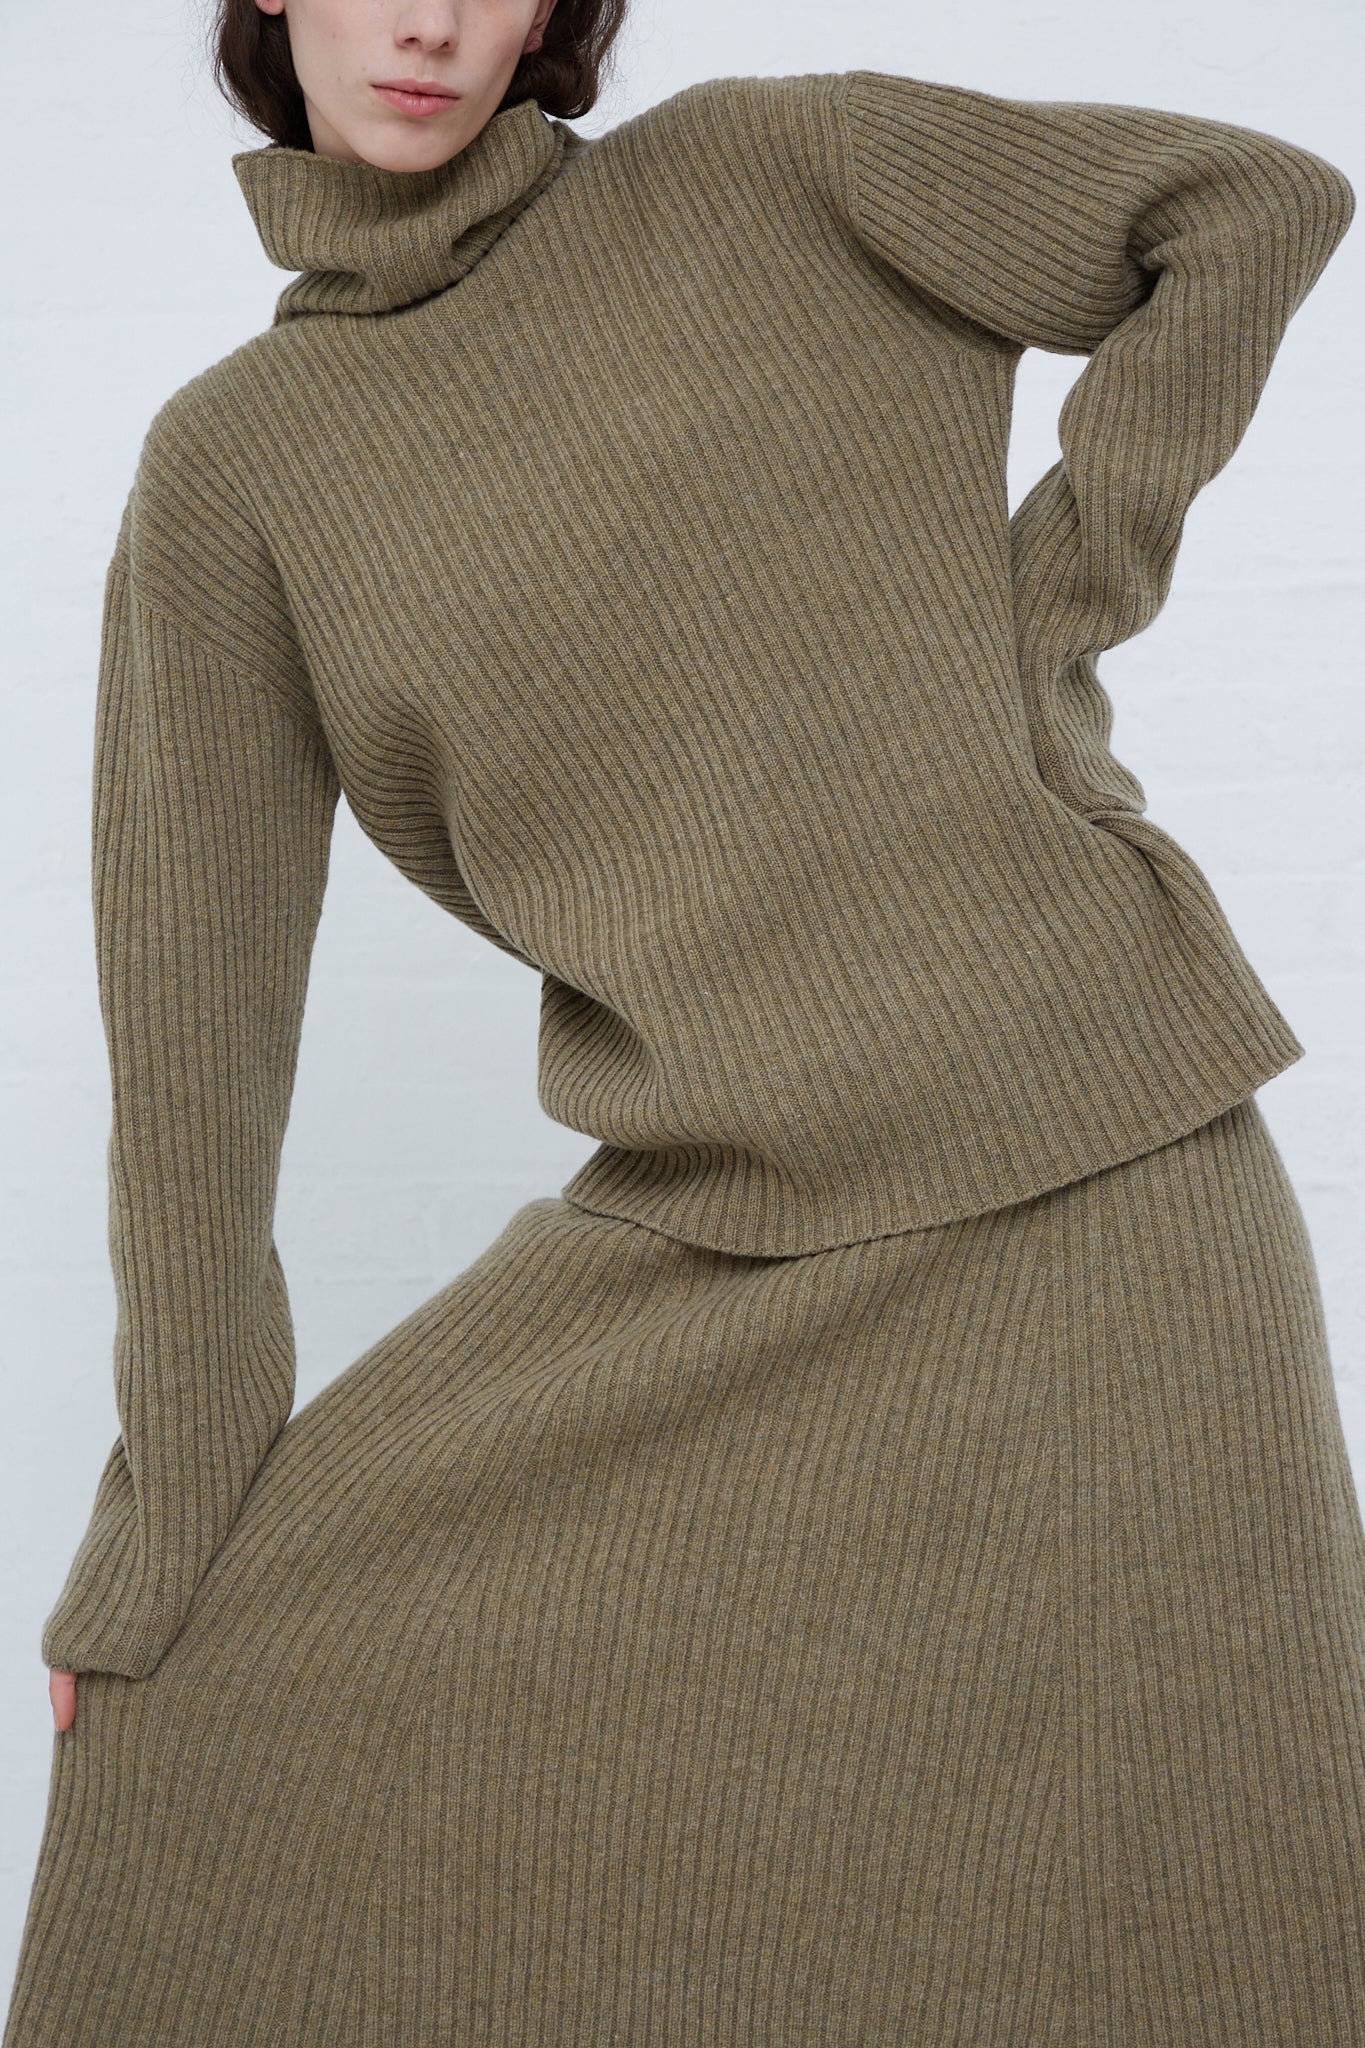 A model showcasing an Ichi Antiquités Wool Rib Knit Turtleneck in Mocha paired with a midi skirt.